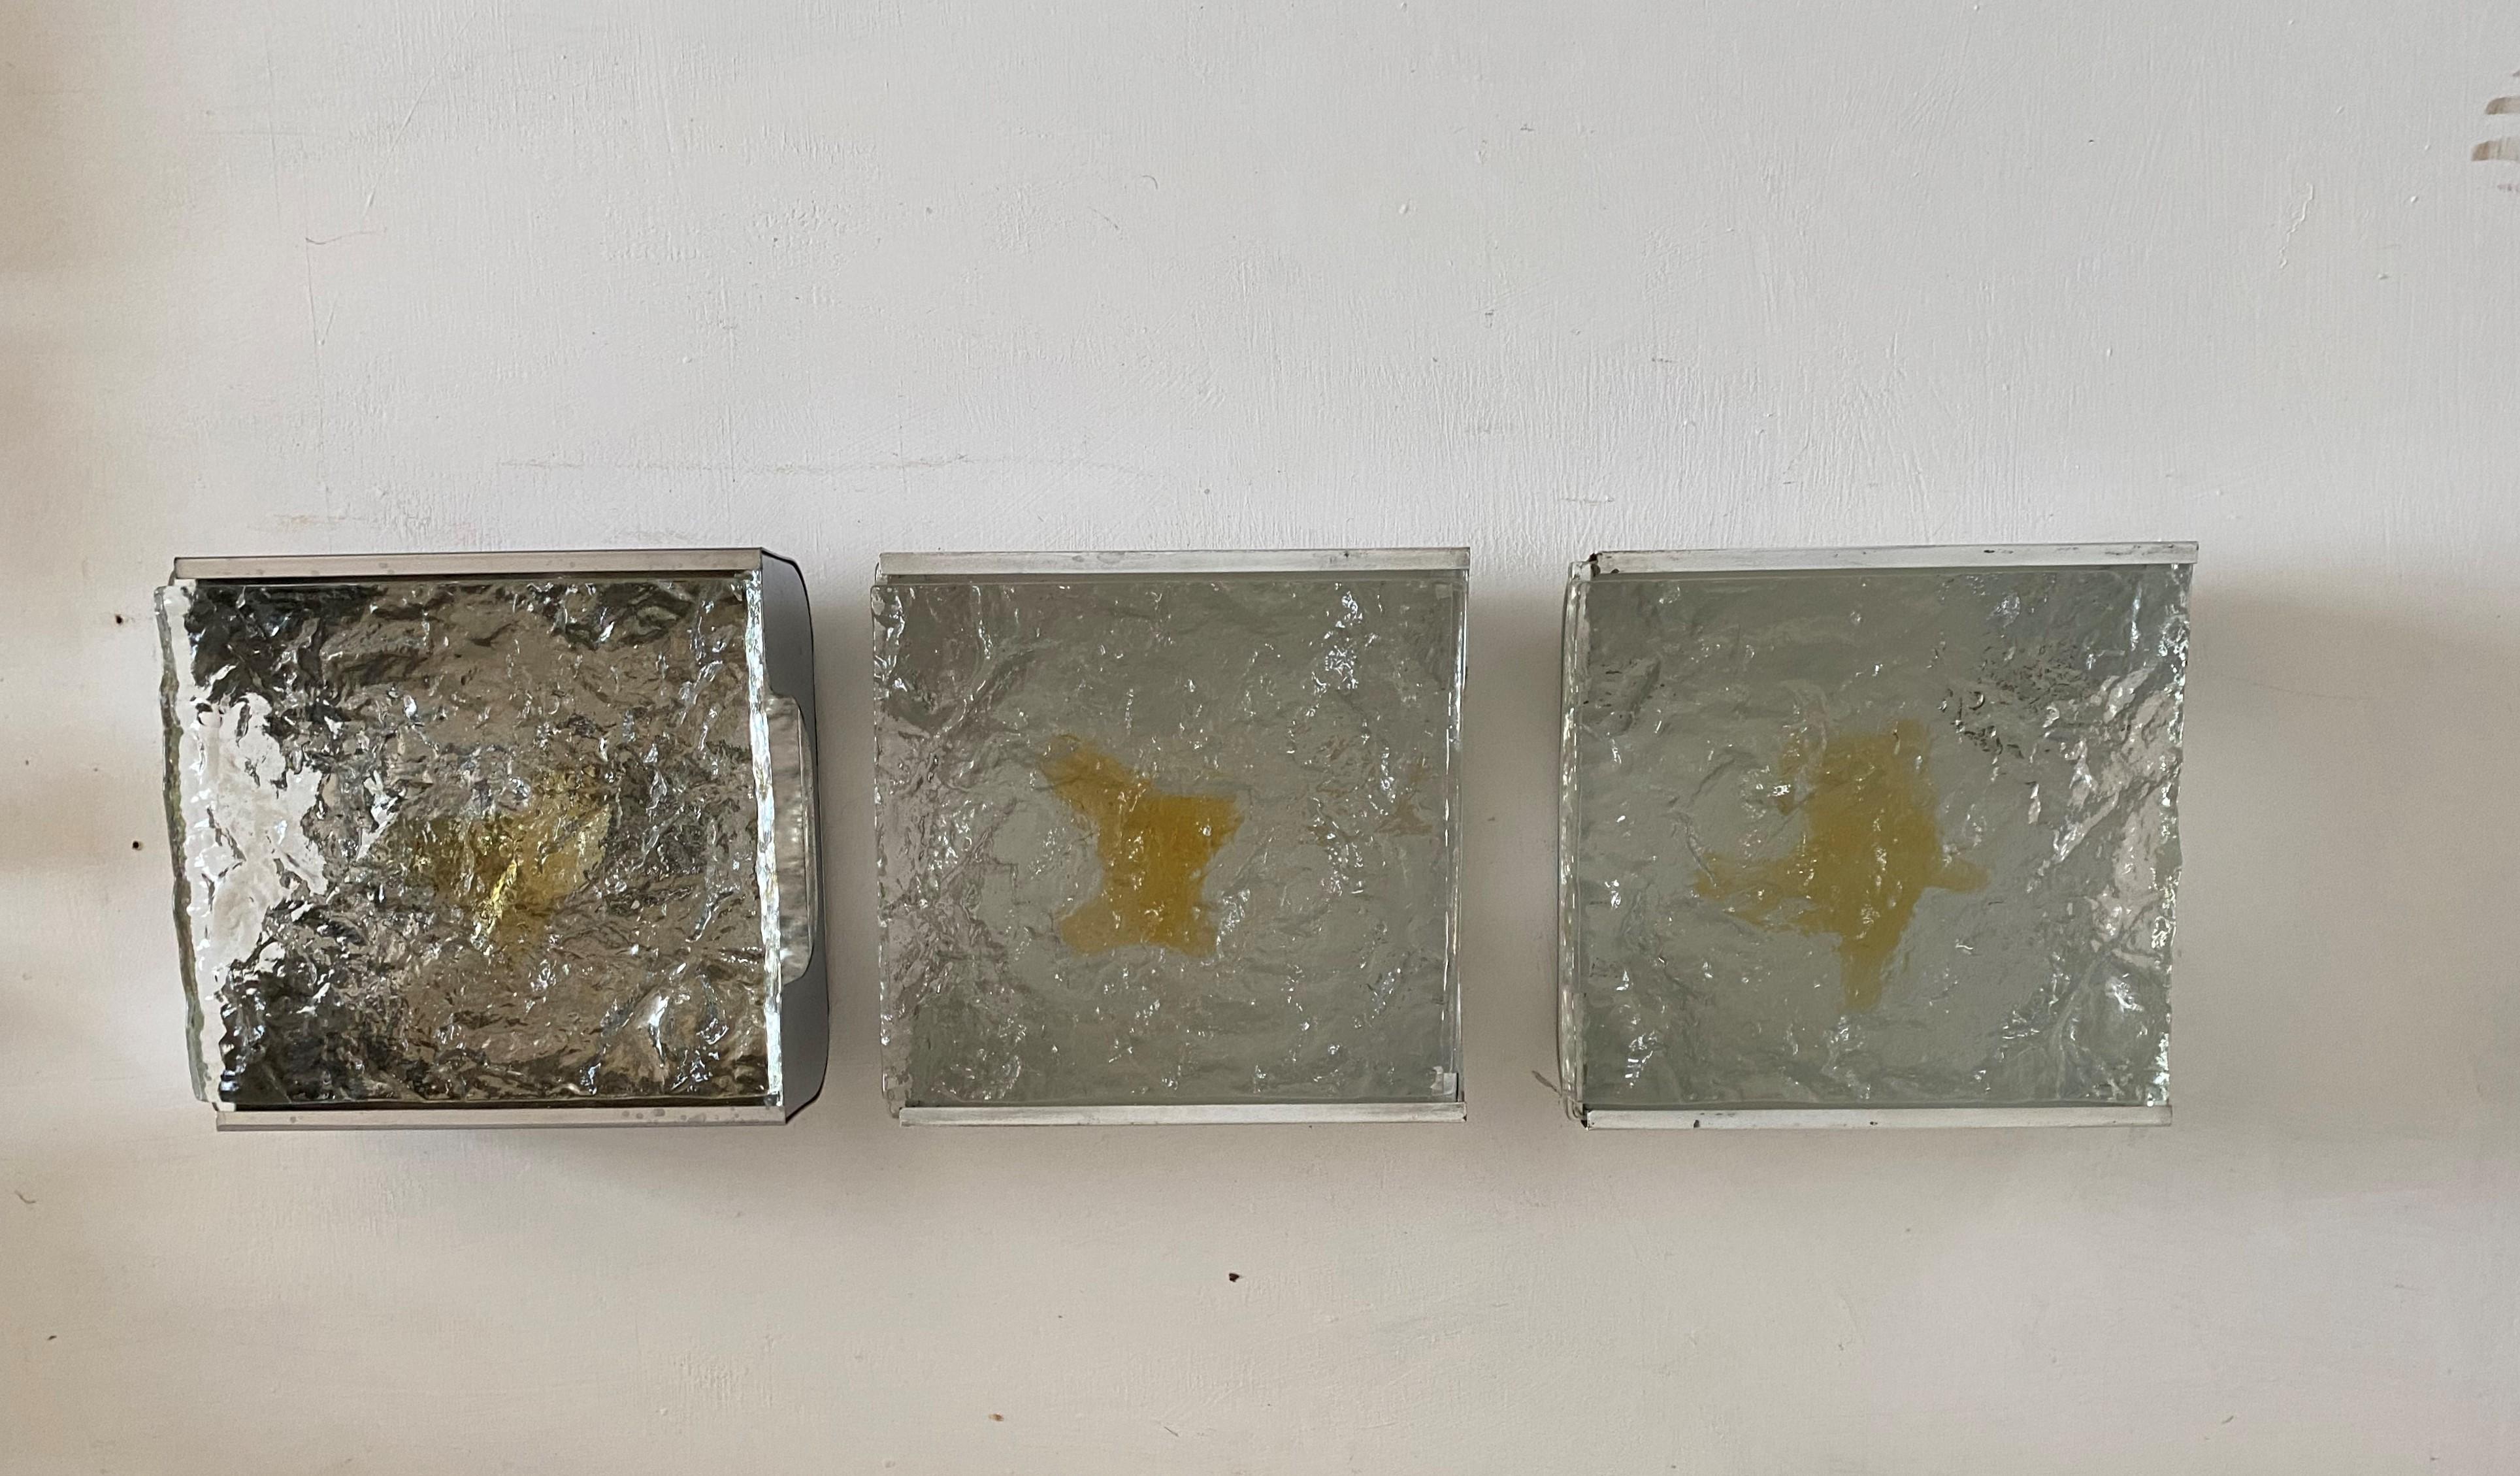 3 Mid-Century Modern Murano glass sconces manufctured by Venini, circa 1960, in clear and amber thick Murano glass slabs.
Metal hardware lacquered white.
It is shown with warm and cold bulbs so the difference can be appreciated.
We have several